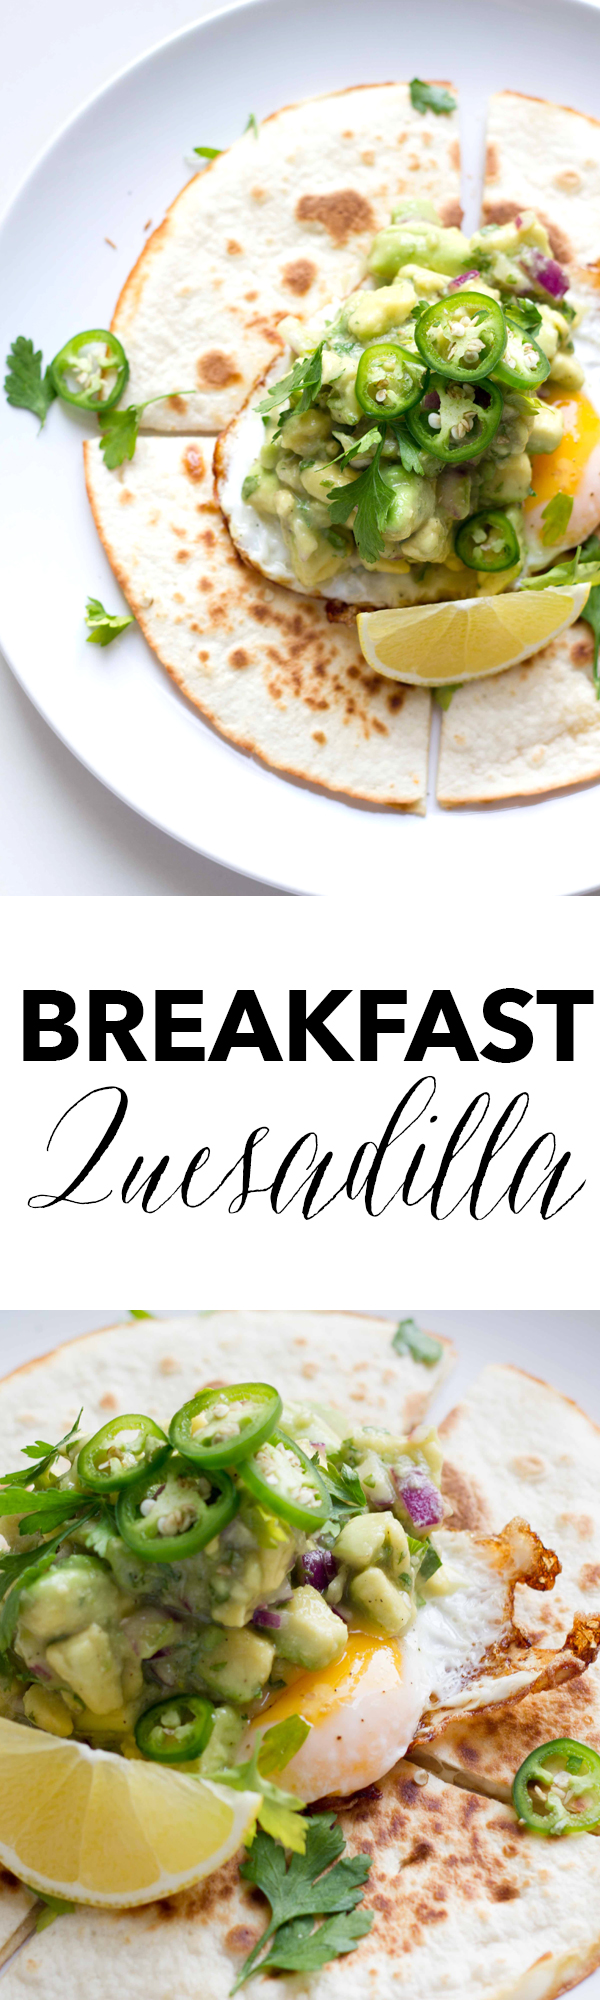 This breakfast quesadilla recipe is filled with melted mozzarella cheese, topped with a fried egg and some spicy guacamole. It definitely packs a breakfast punch! www.seriousspice.com